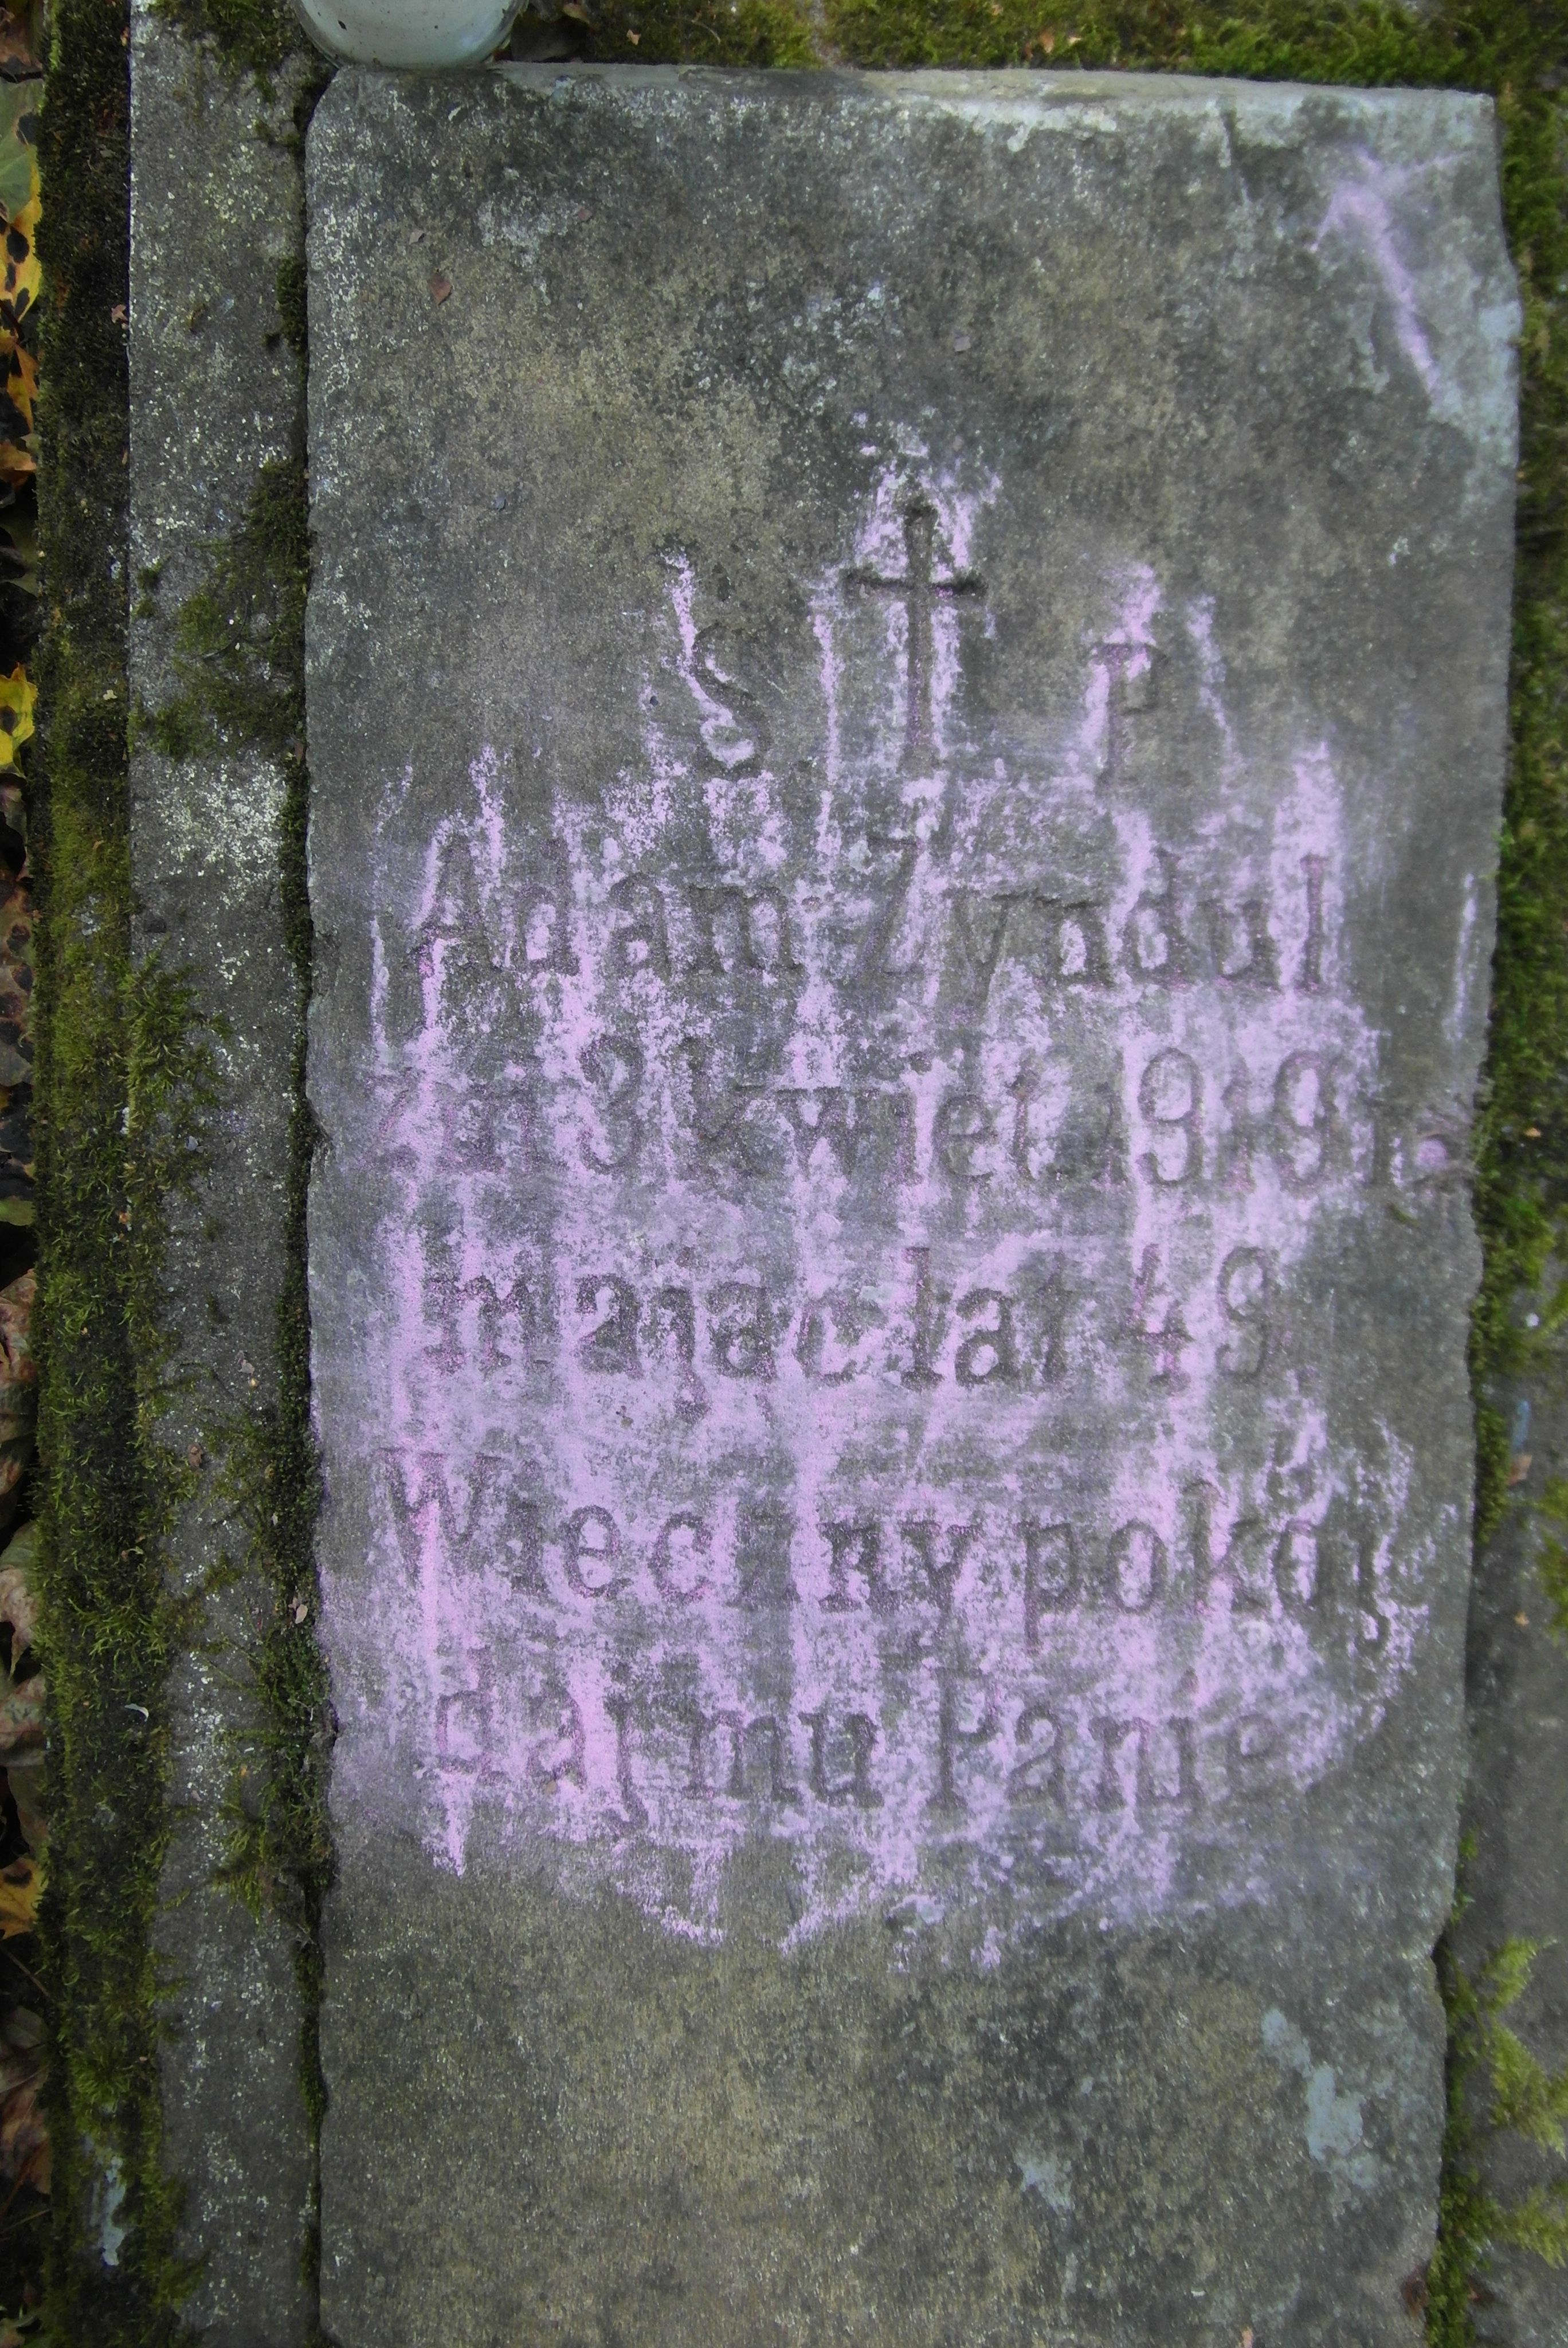 Inscription from the gravestone of Adam Zyndul, St Michael's cemetery in Riga, as of 2021.